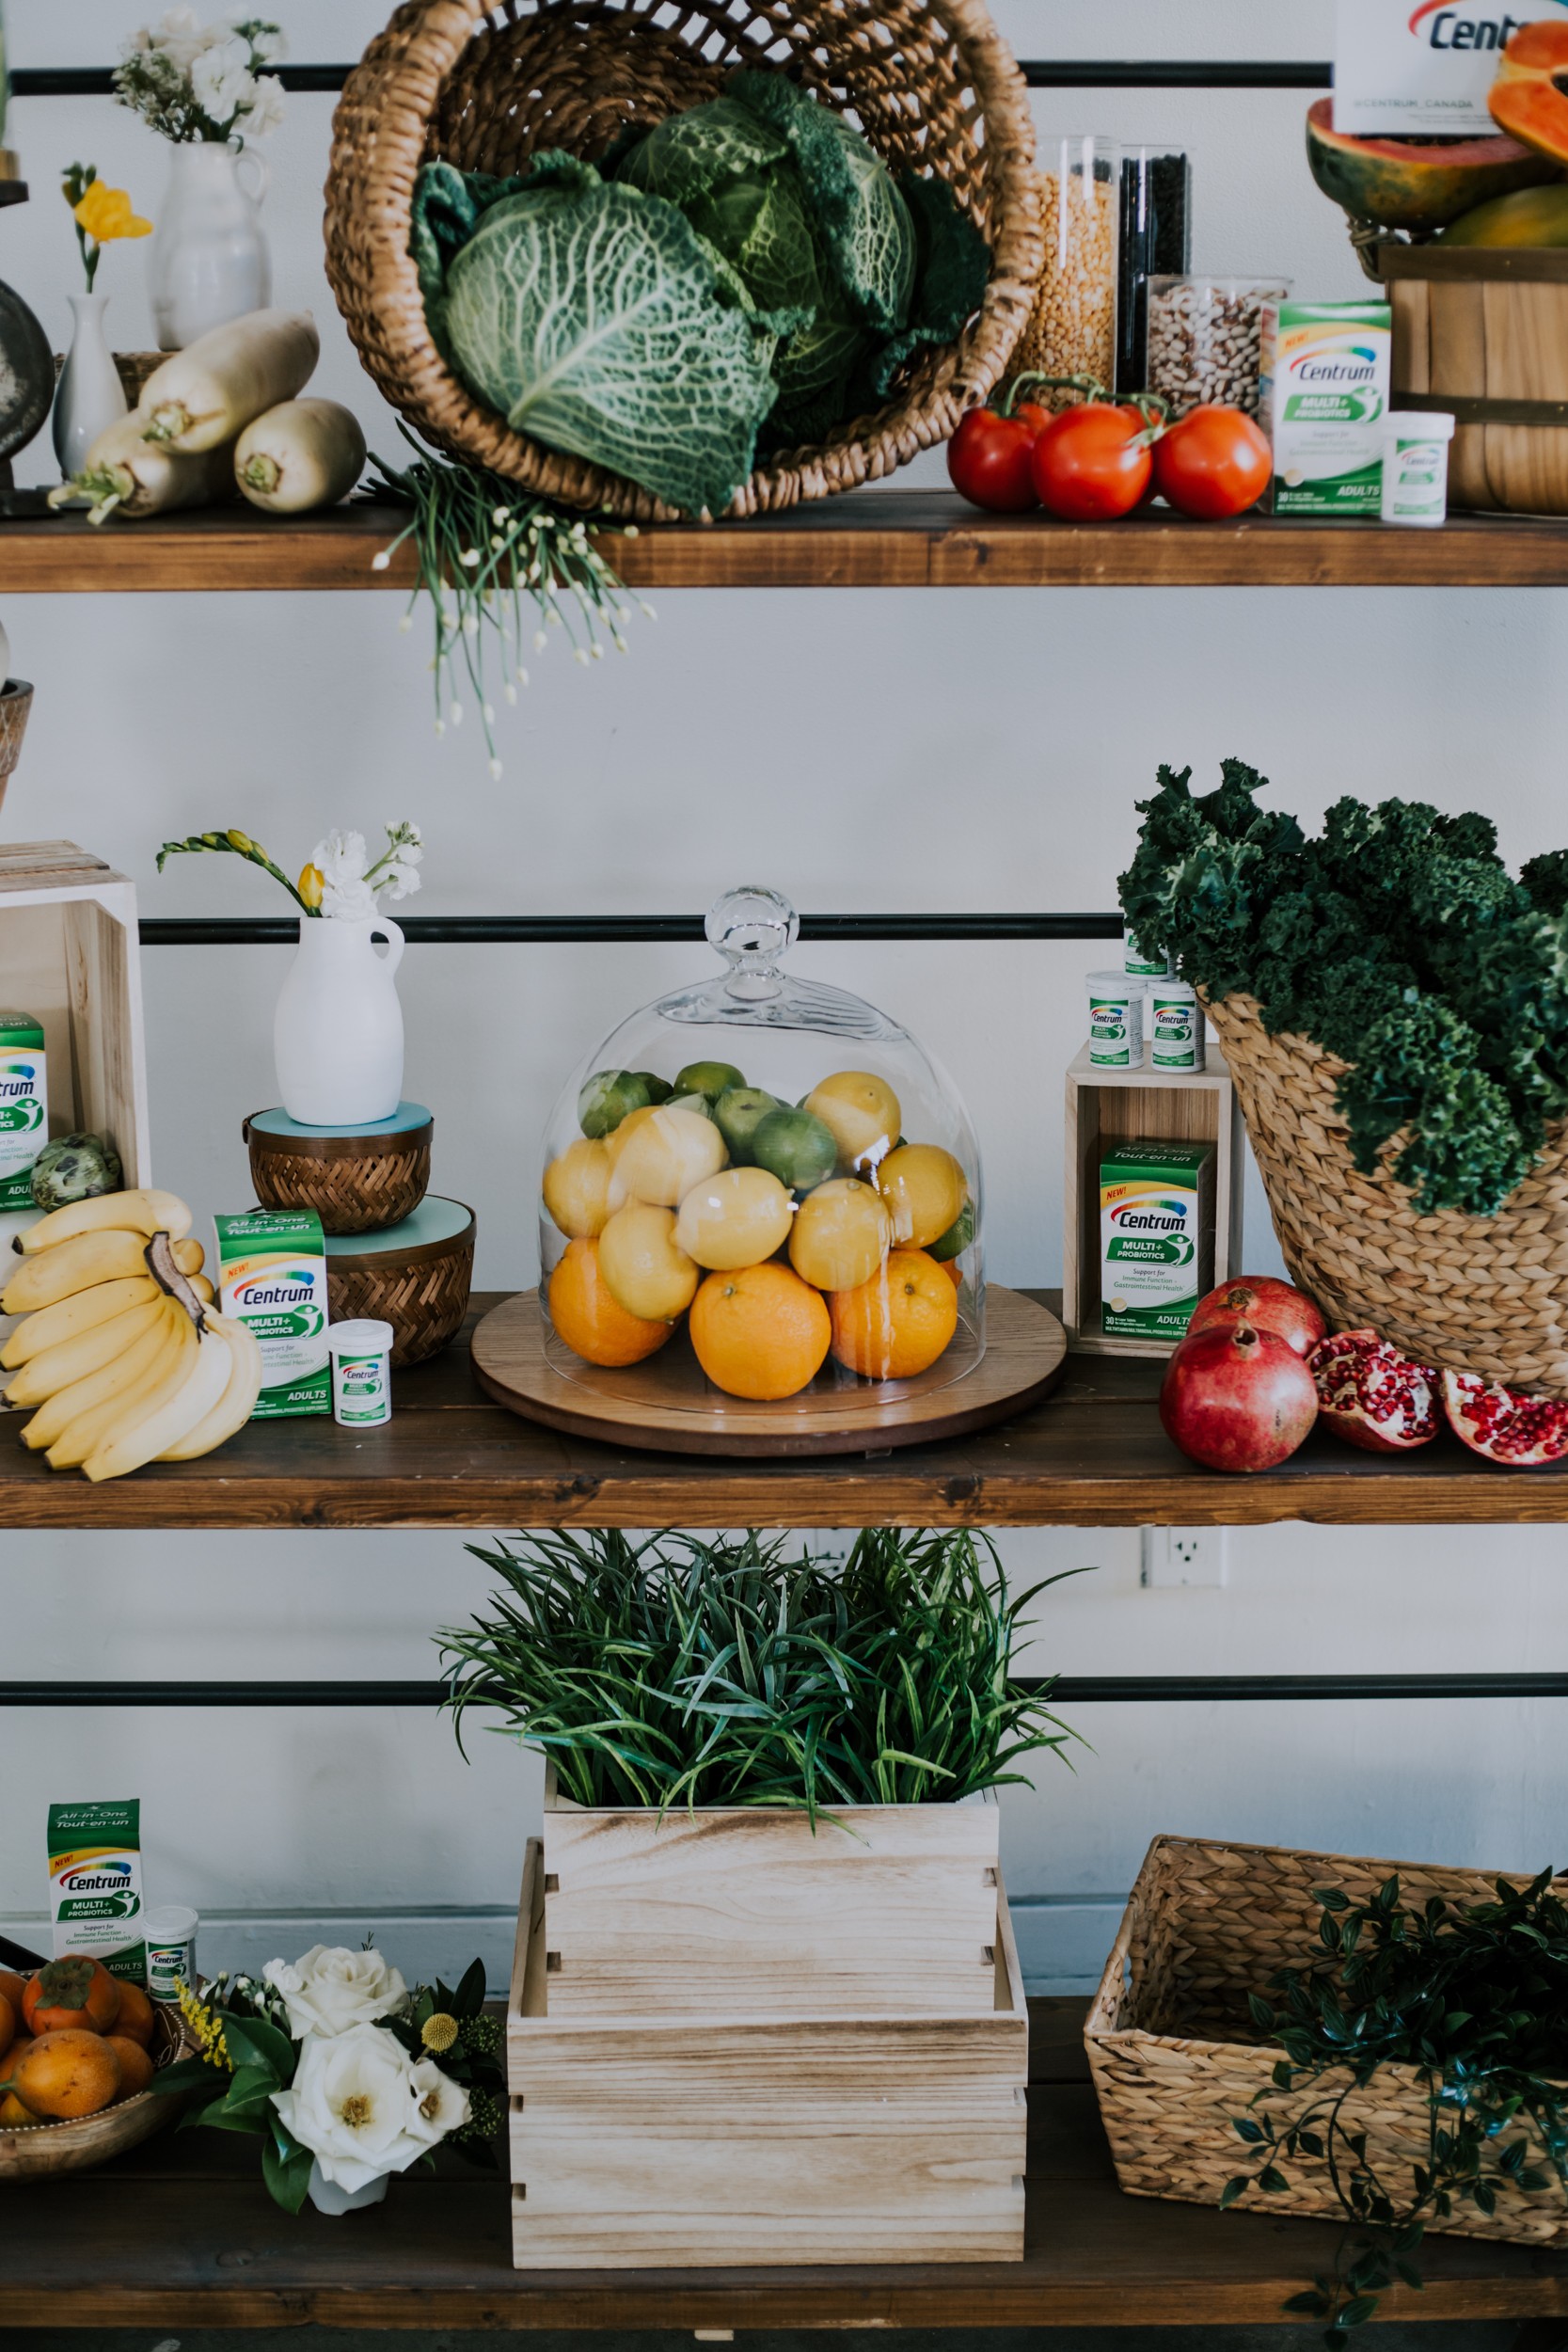 fruits and veggies on a shelf to promote centrum's multi probiotic vitamin. lemons, limes, oranges, pomegranate, cabbage, tomatoes to name a few.